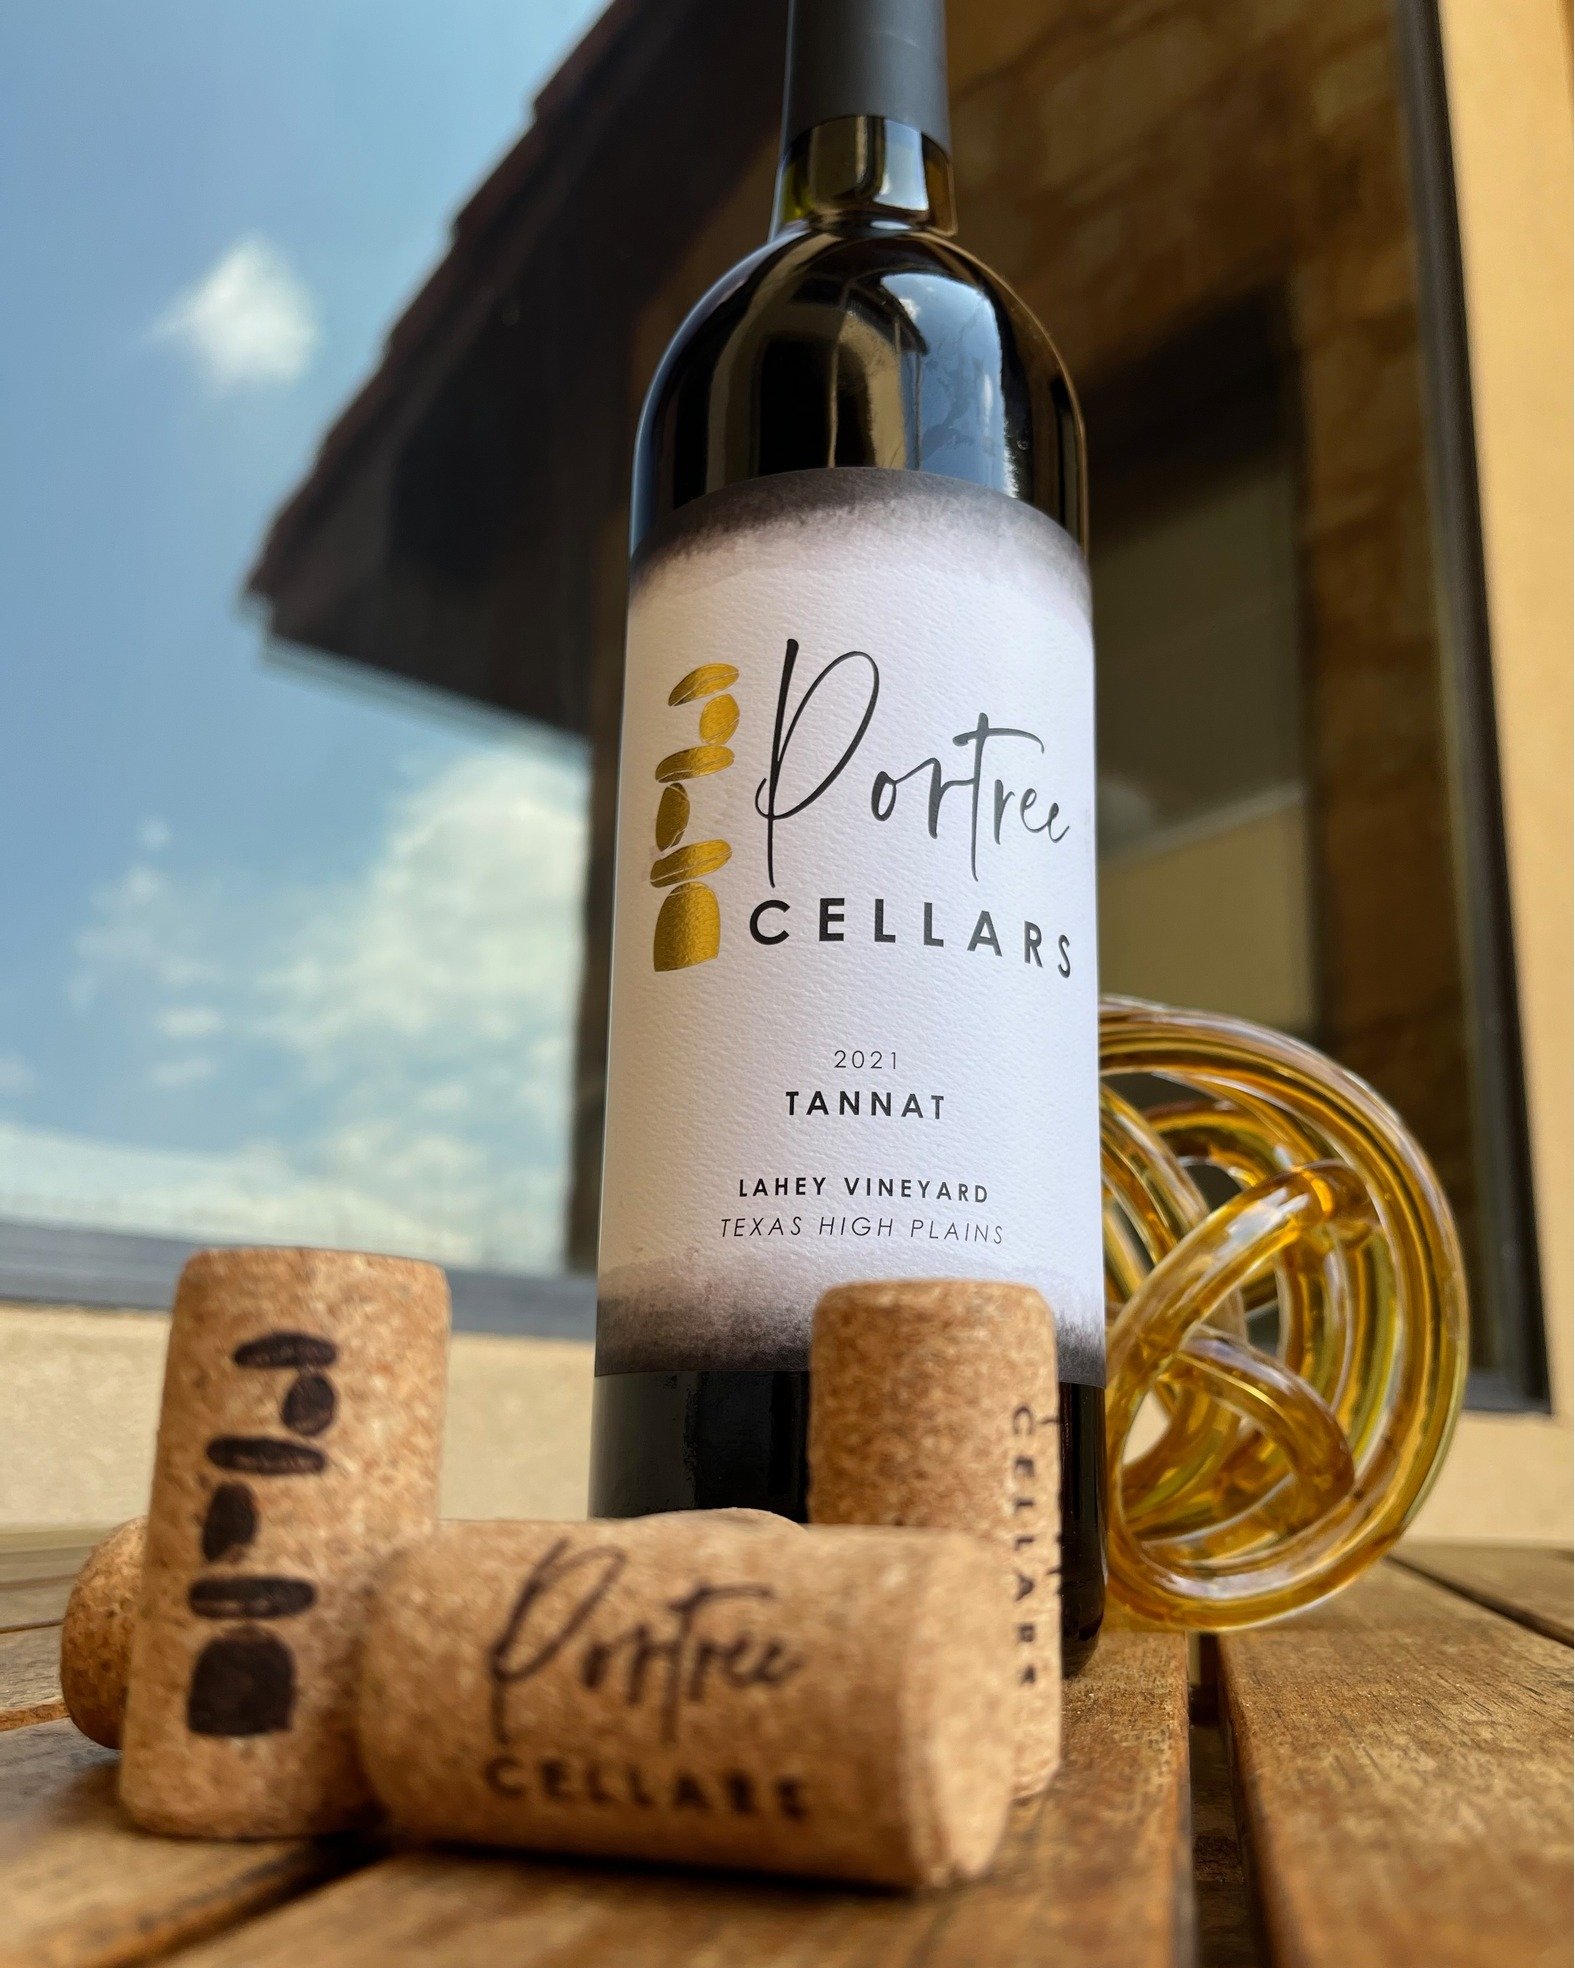 Happy International Tannat Day!  Enjoy ours and celebrate a robust, 100% Texas wine!  Get it in our Hye tasting room or online at www.portreecellars.com.  Cheers!

#portreecellars #tannat #tannatwine #redwinelover #winelover #redwine #hyetexas